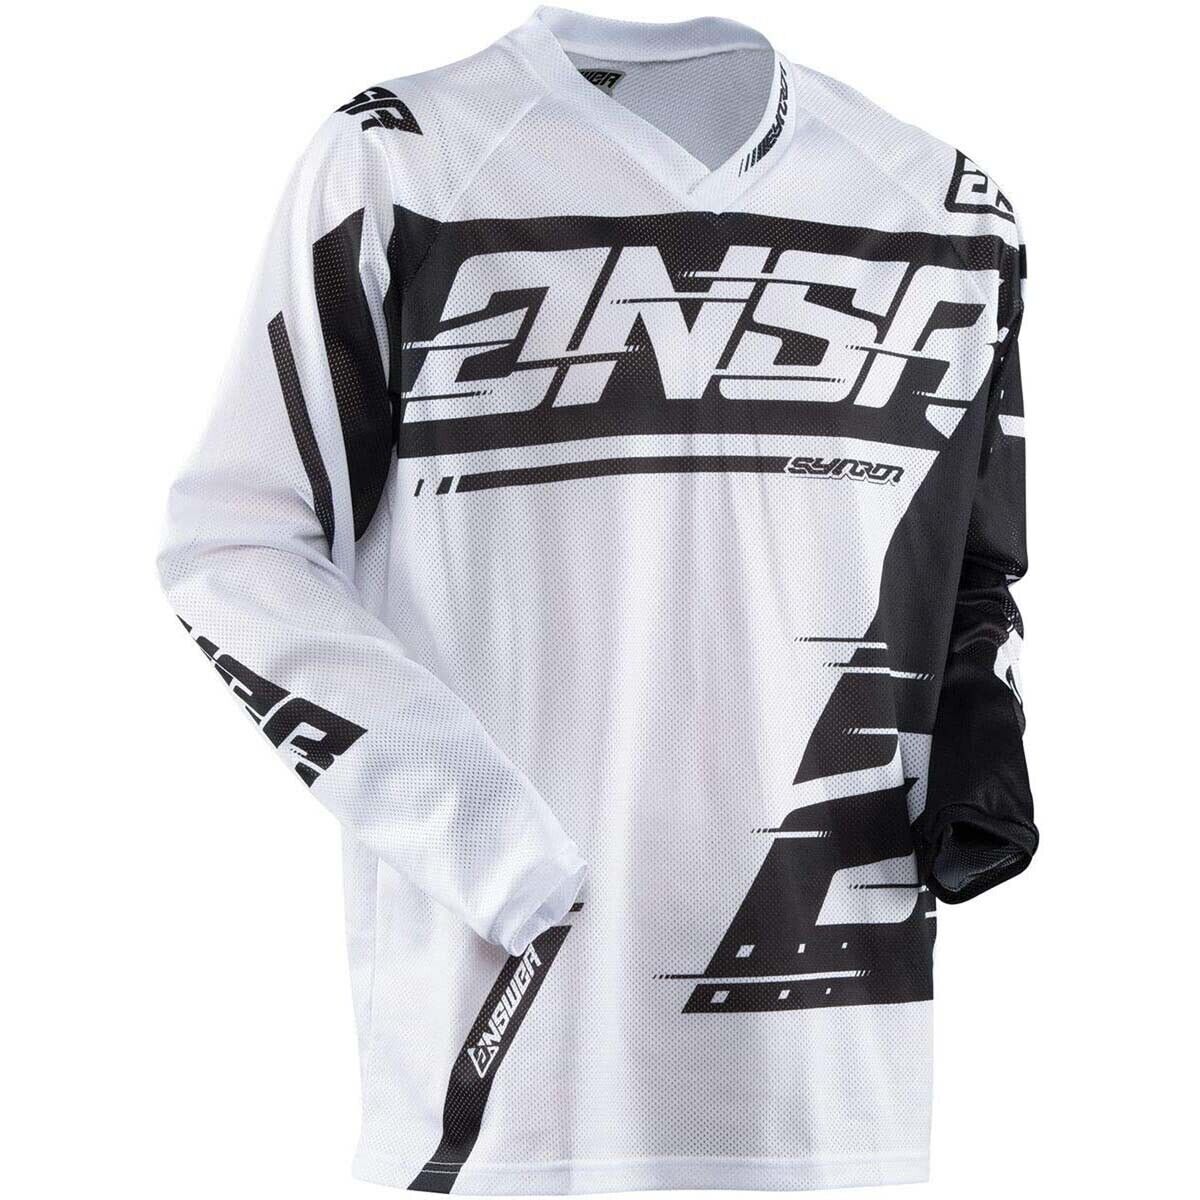 Answer Racing Syncron Air Off-Road MX Sale Special Price M Genuine Free Shipping Black Jersey White YOUTH